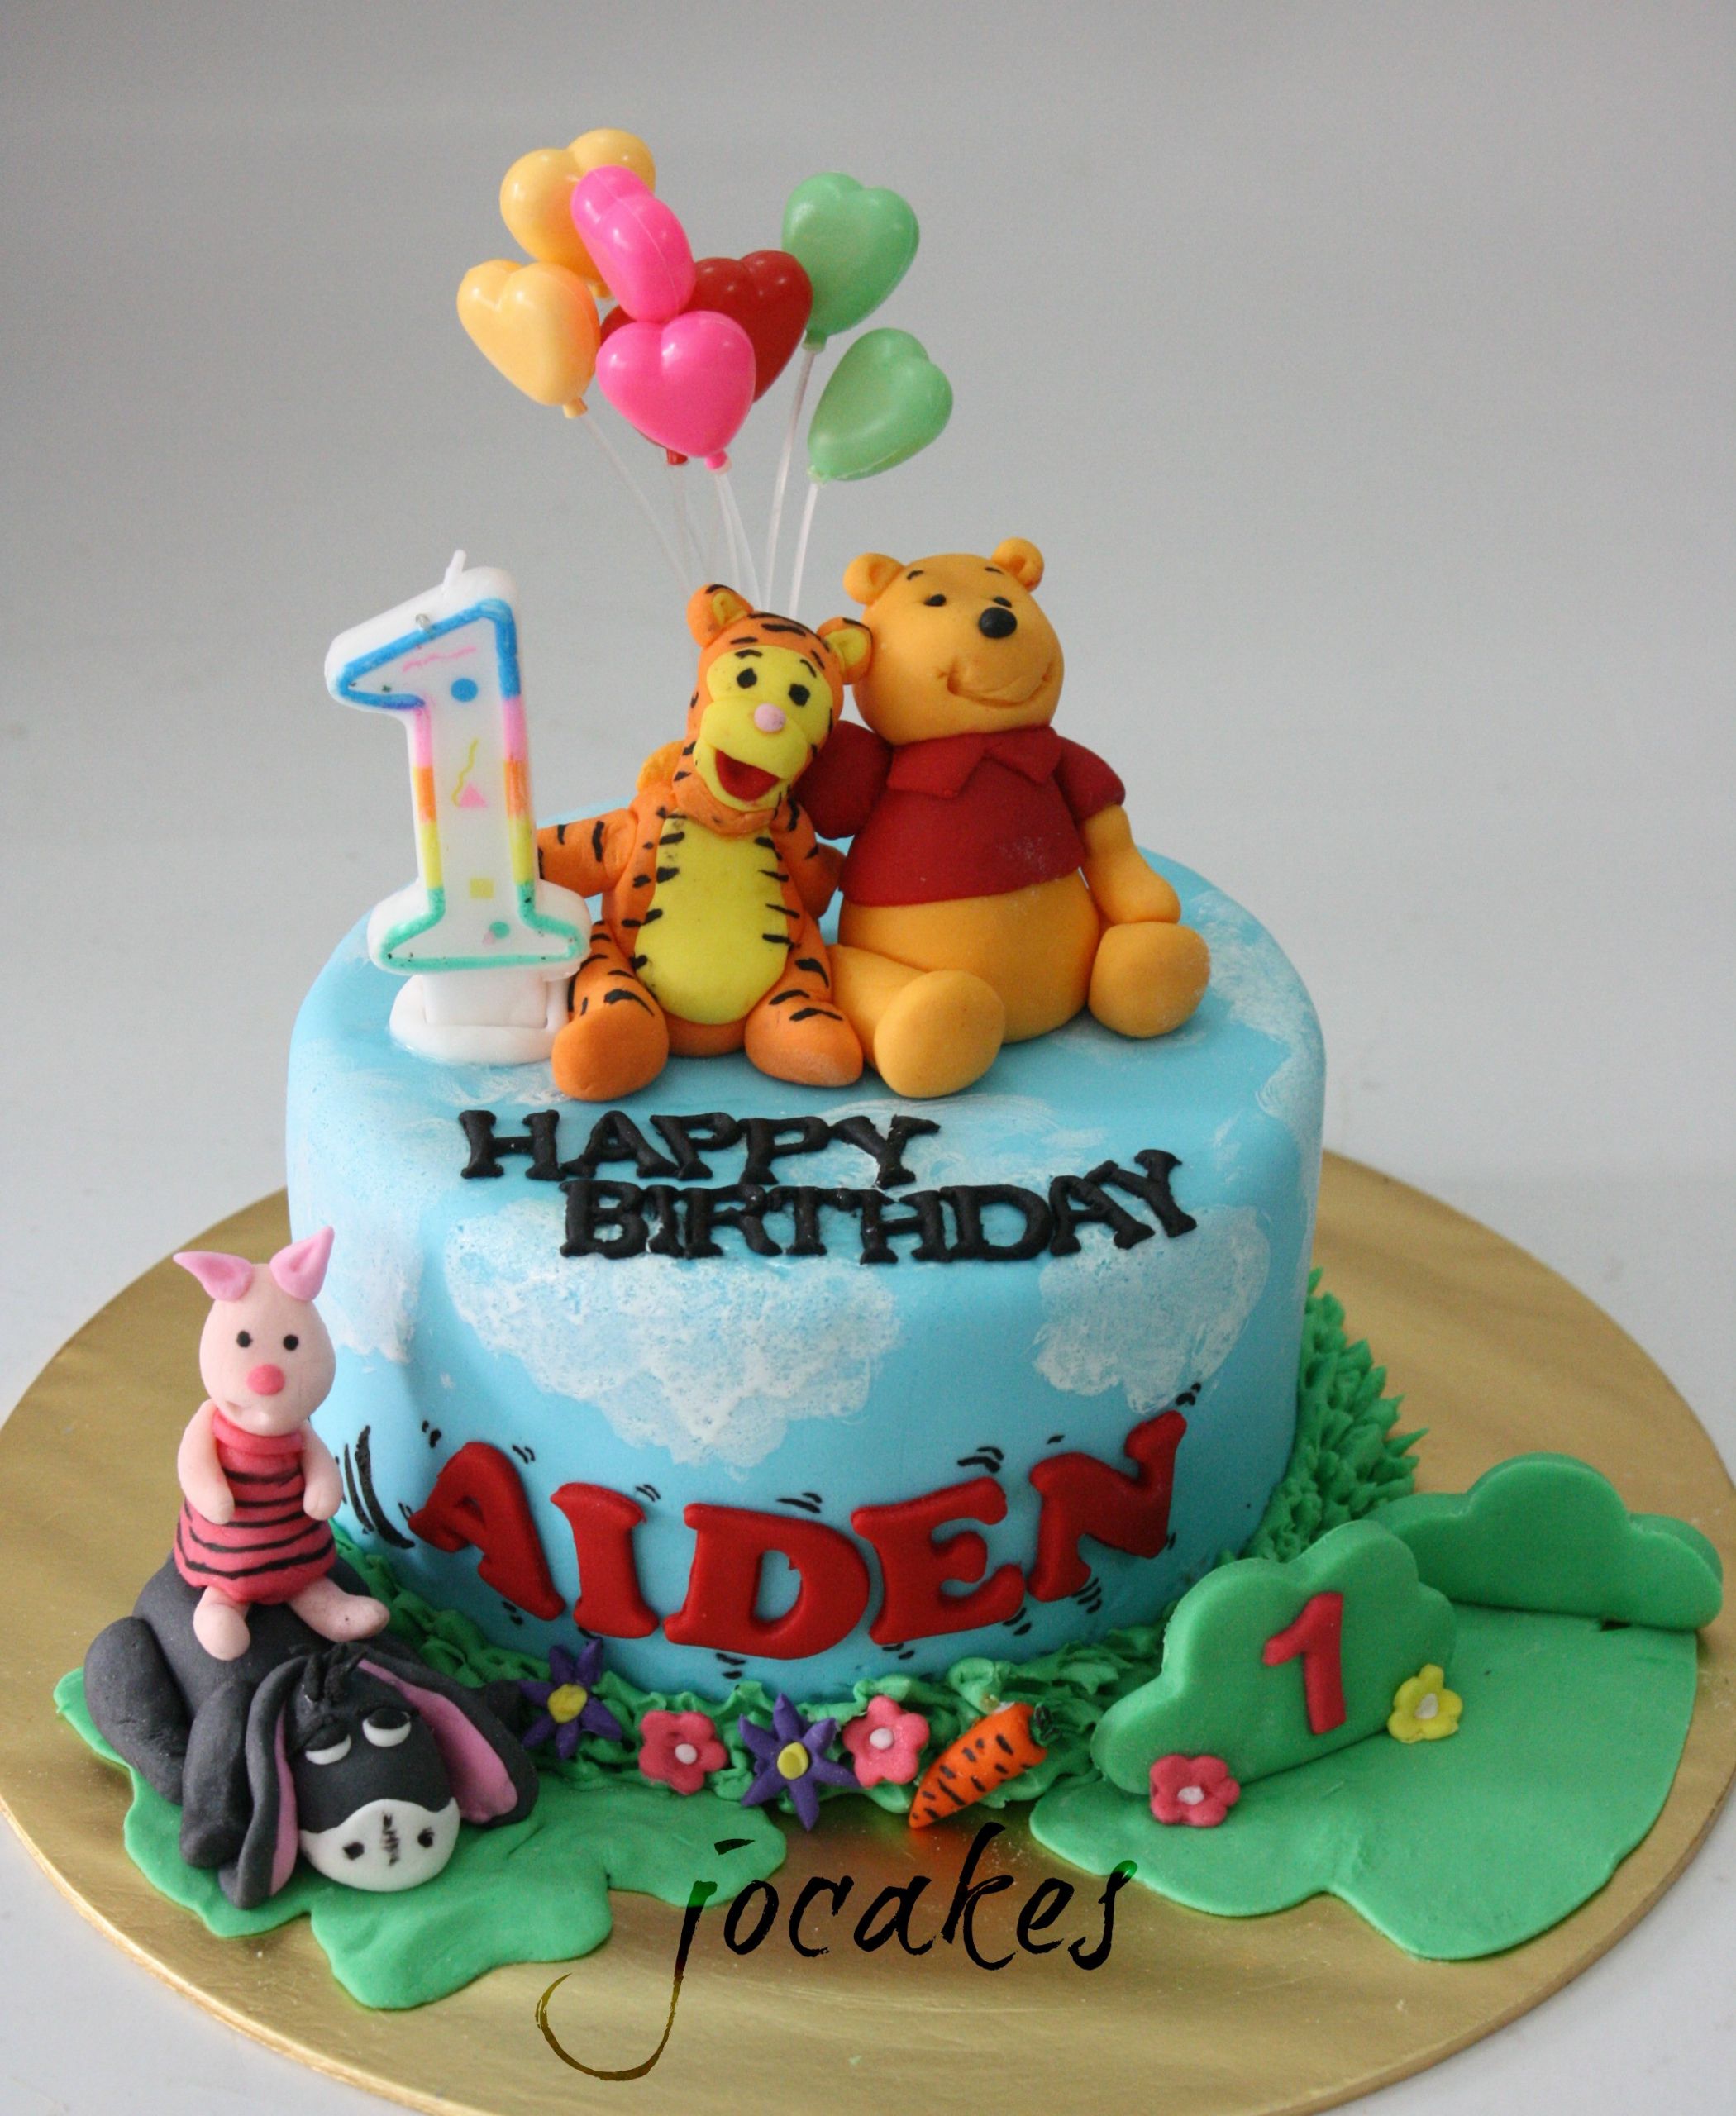 One Year Old Birthday Cake
 Winnie the Pooh and friends cake for 1 year old boy Aiden